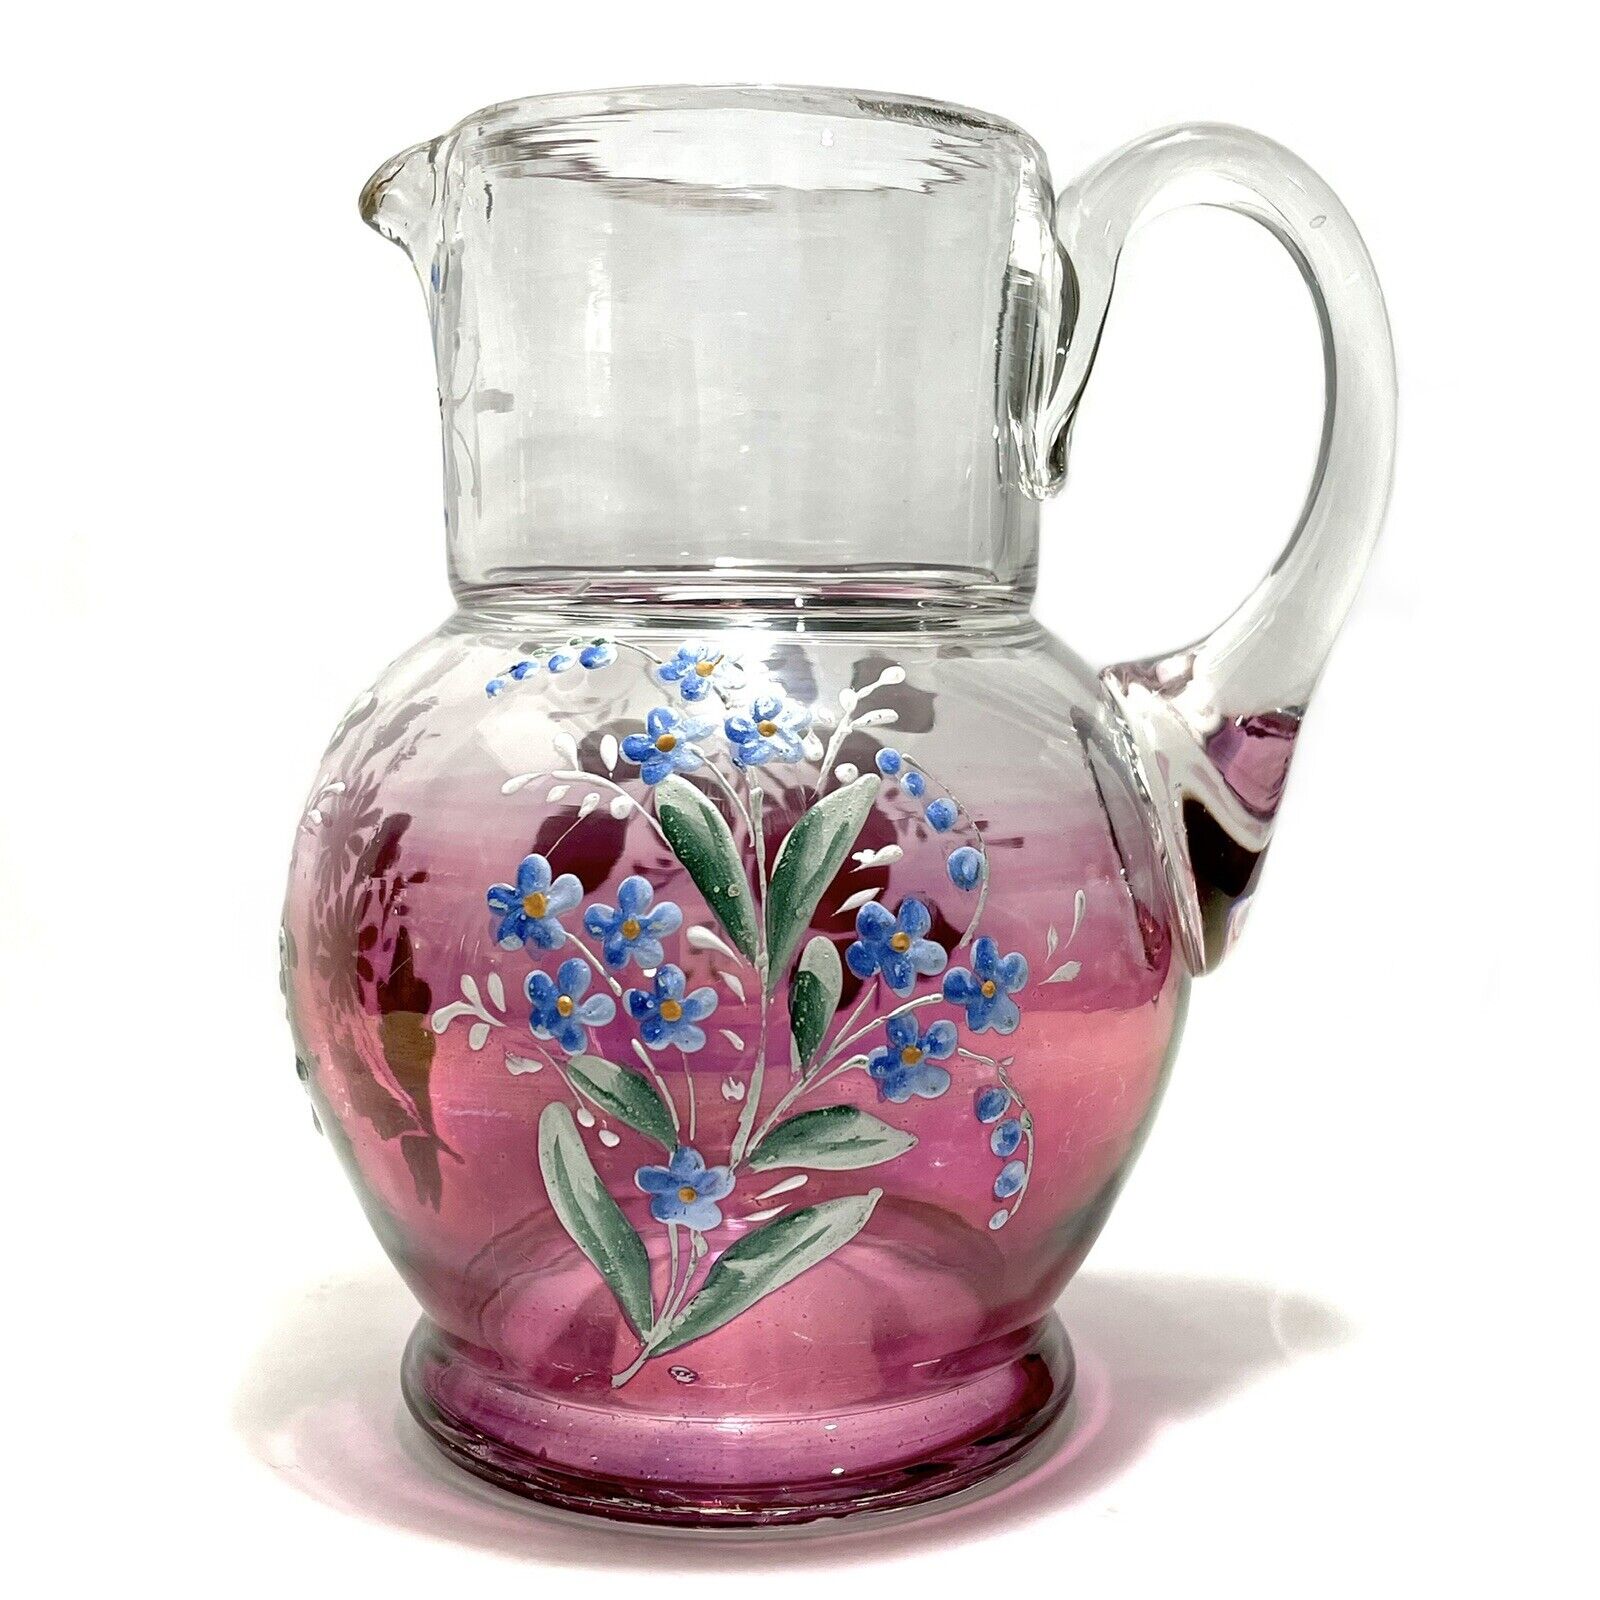 Antique 1880s Victorian Hand Blown Glass Pitcher Hand Painted Flowers Ladybug